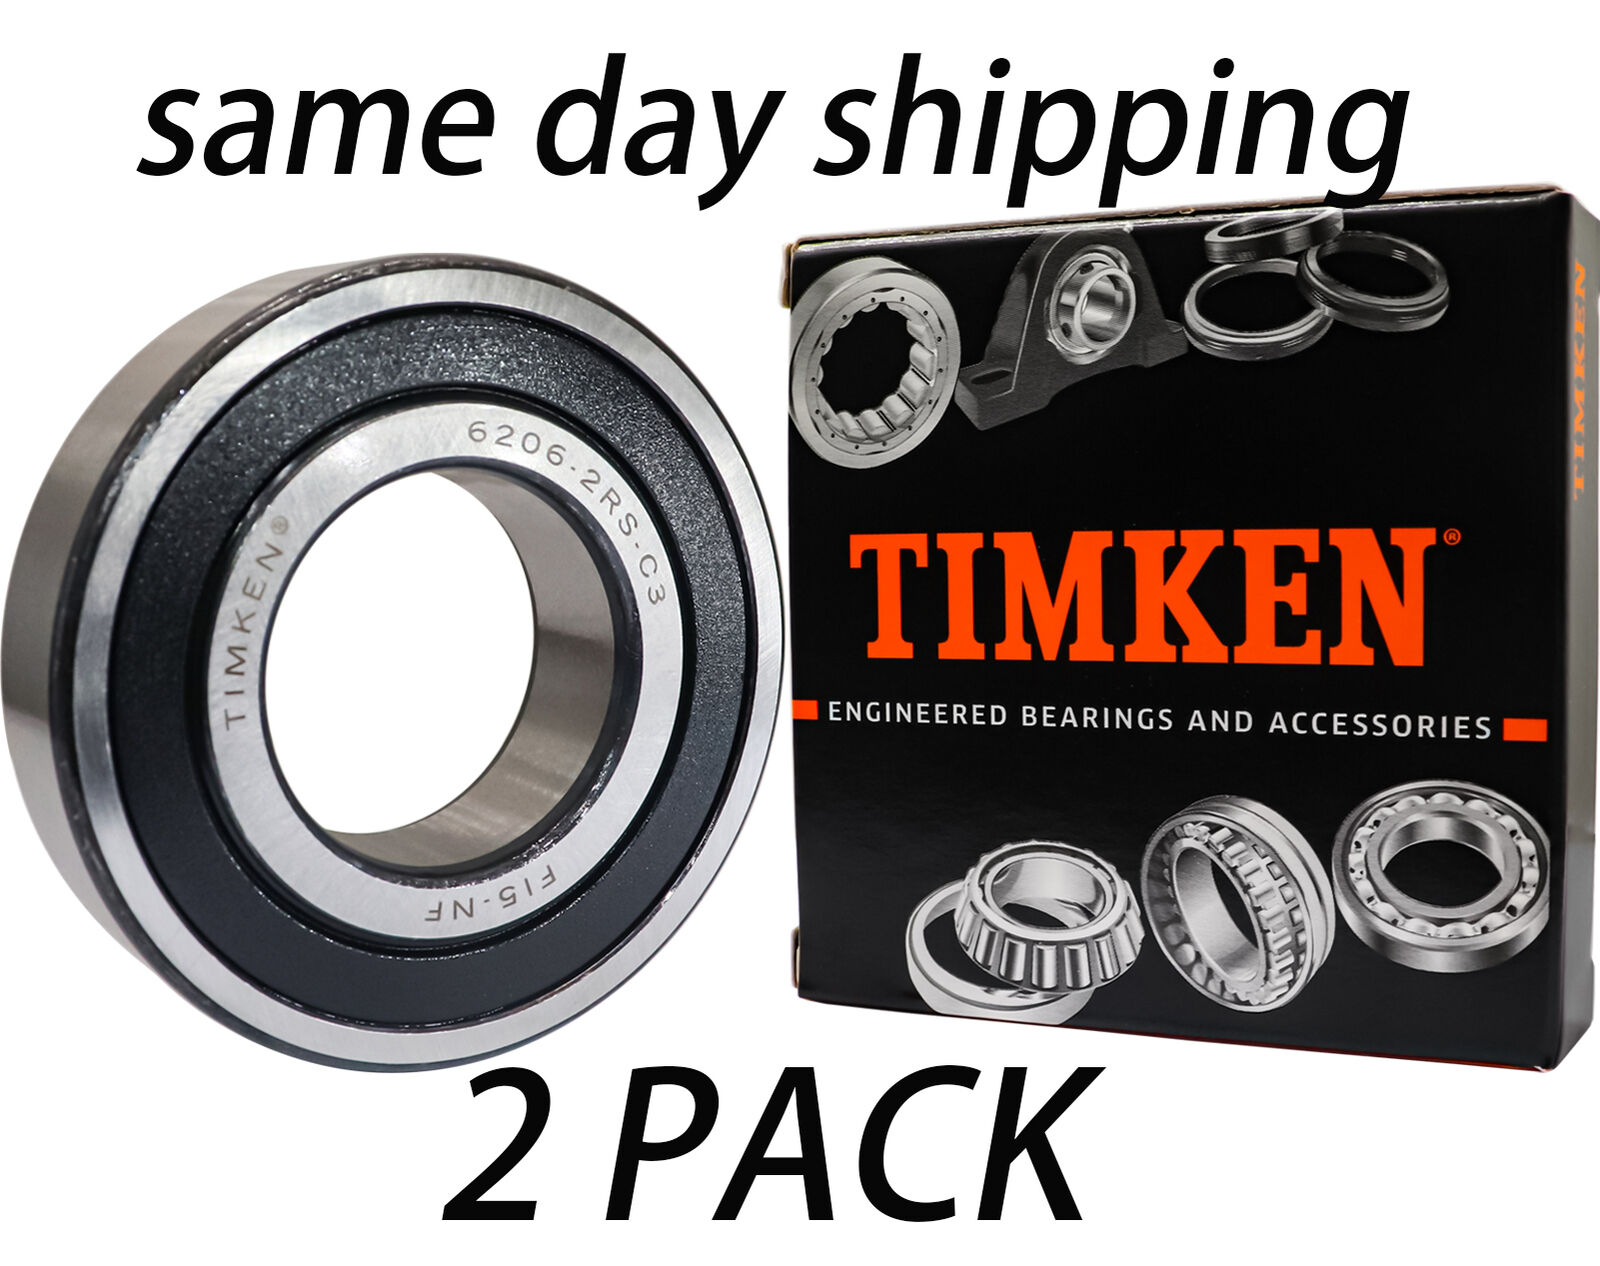 (2 PACK) TIMKEN 6206-2RSC3 30X62X16MM C3 Clearance Double Rubber Seal Bearings